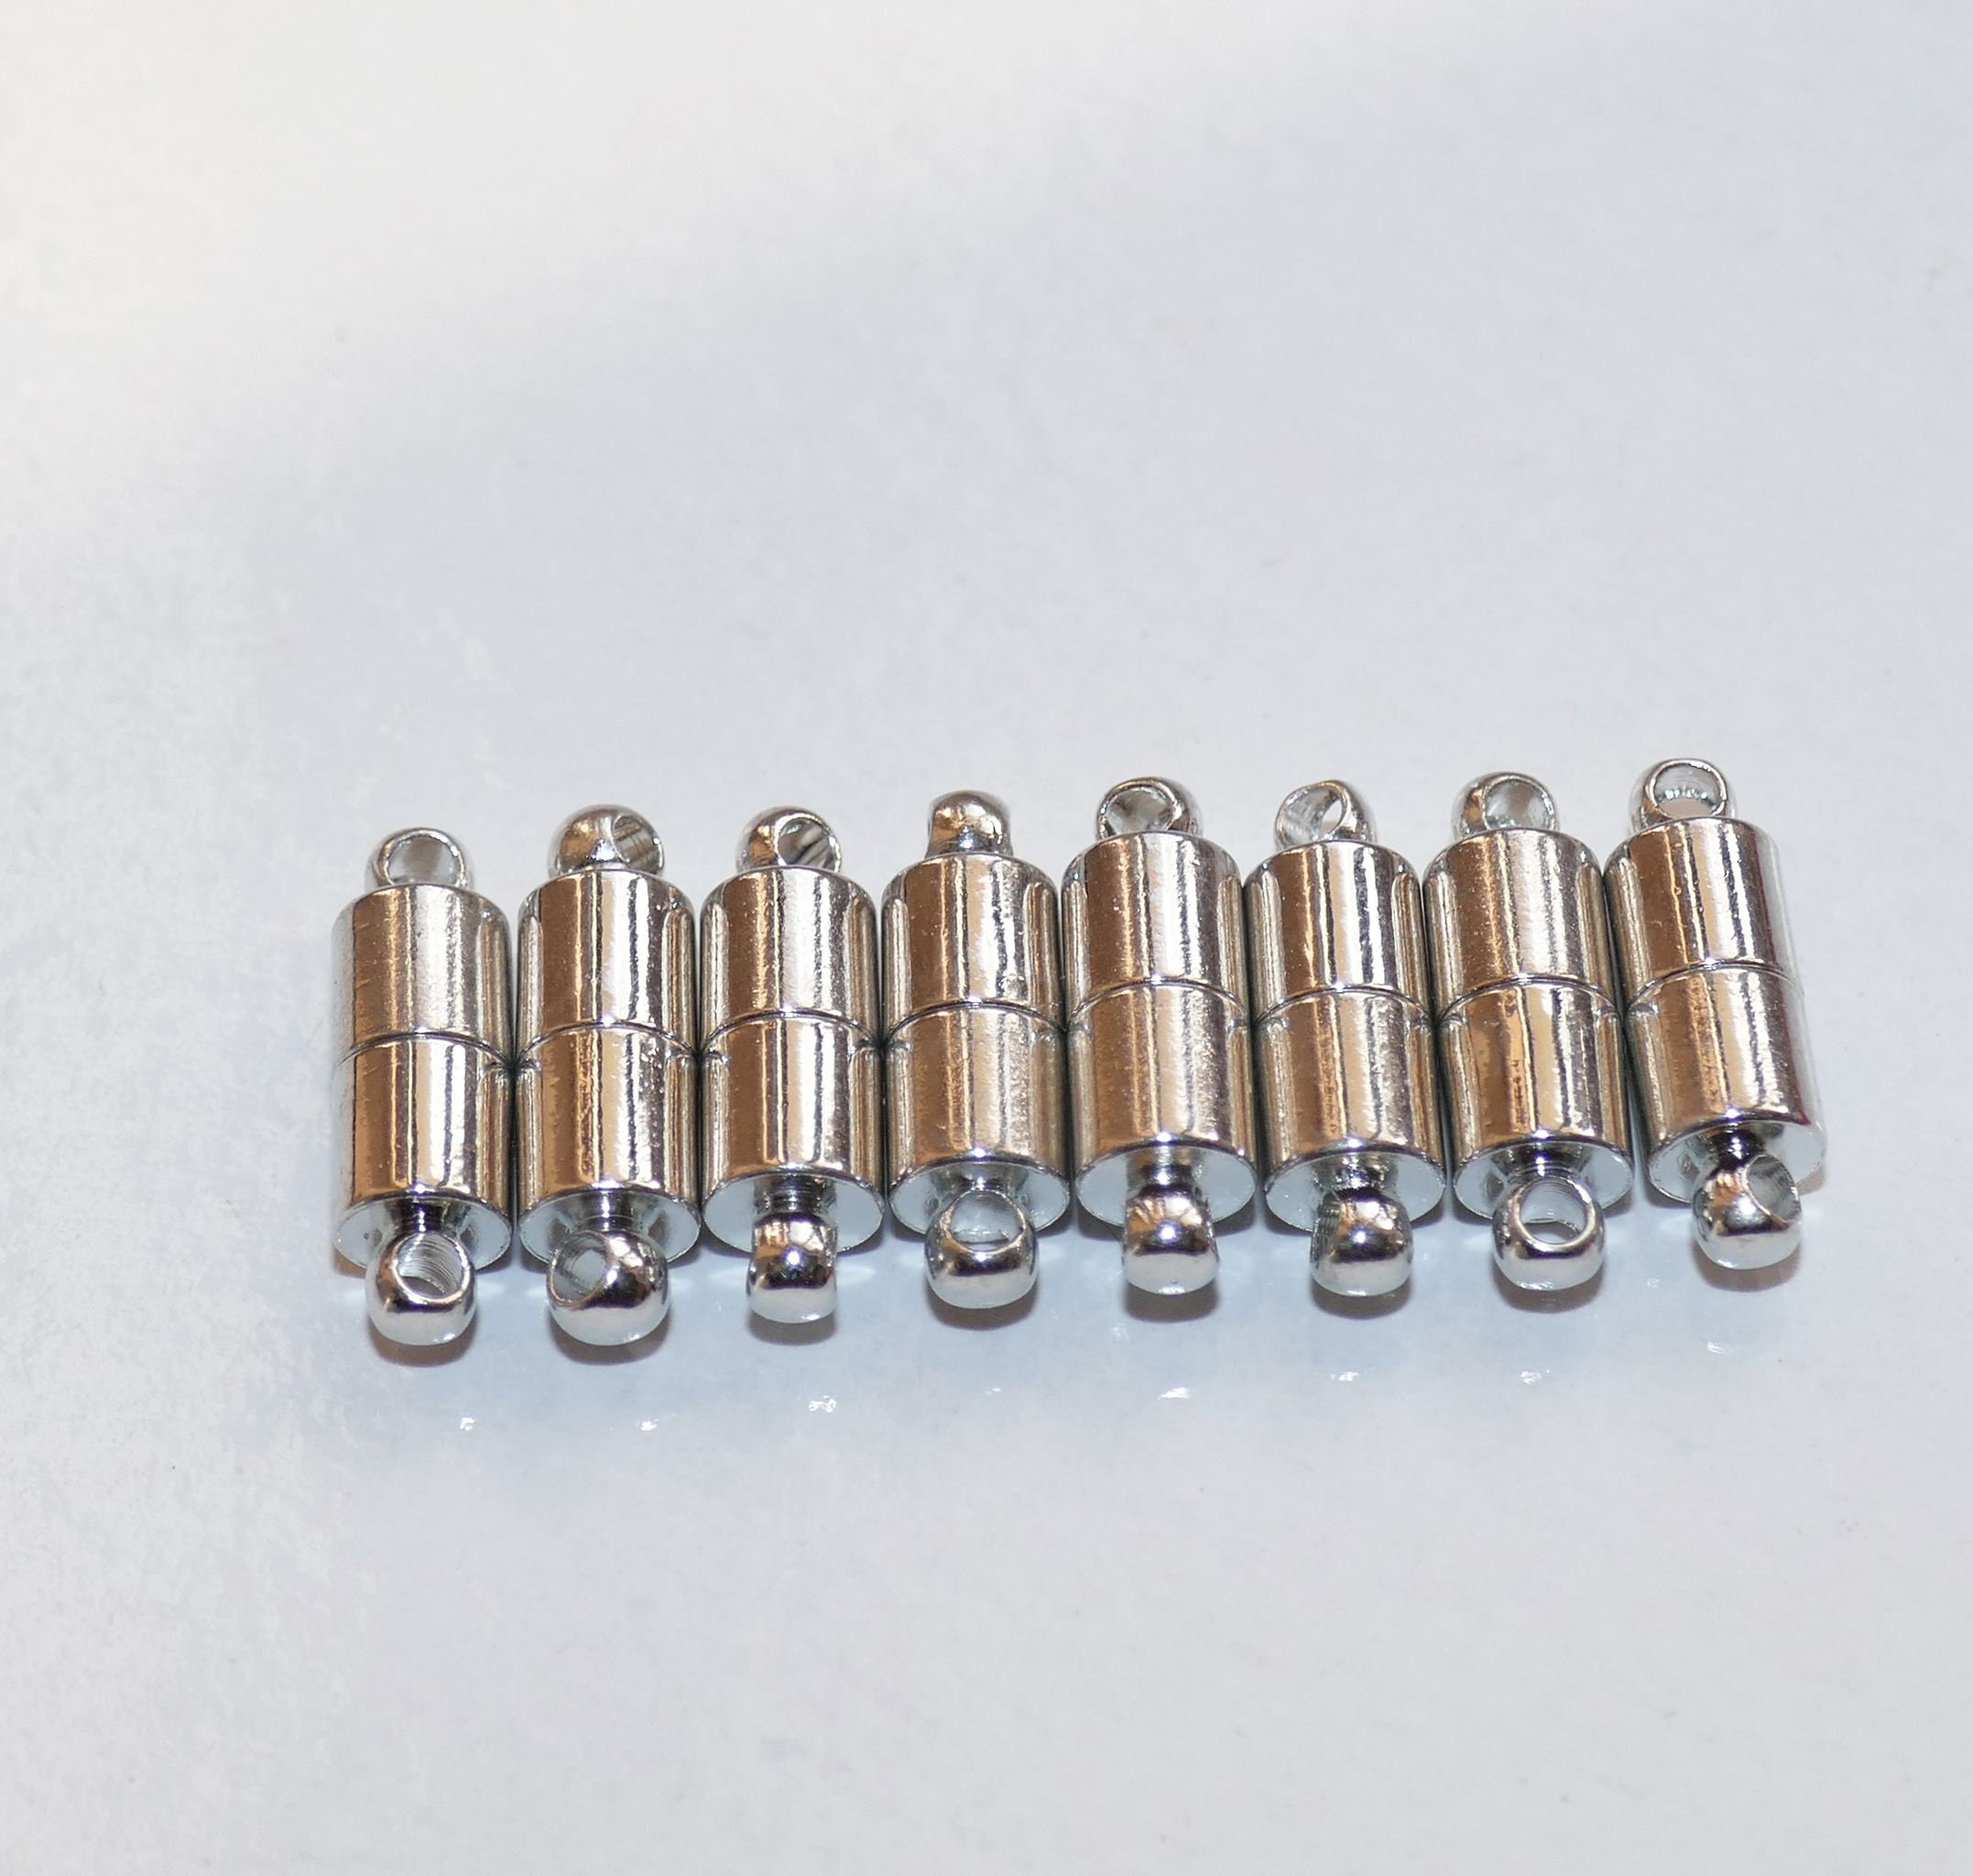 Extra strong golden magnetic clasp, 20 mm socket cylinder, 5 pieces  nickel-free, for DIY necklace cord